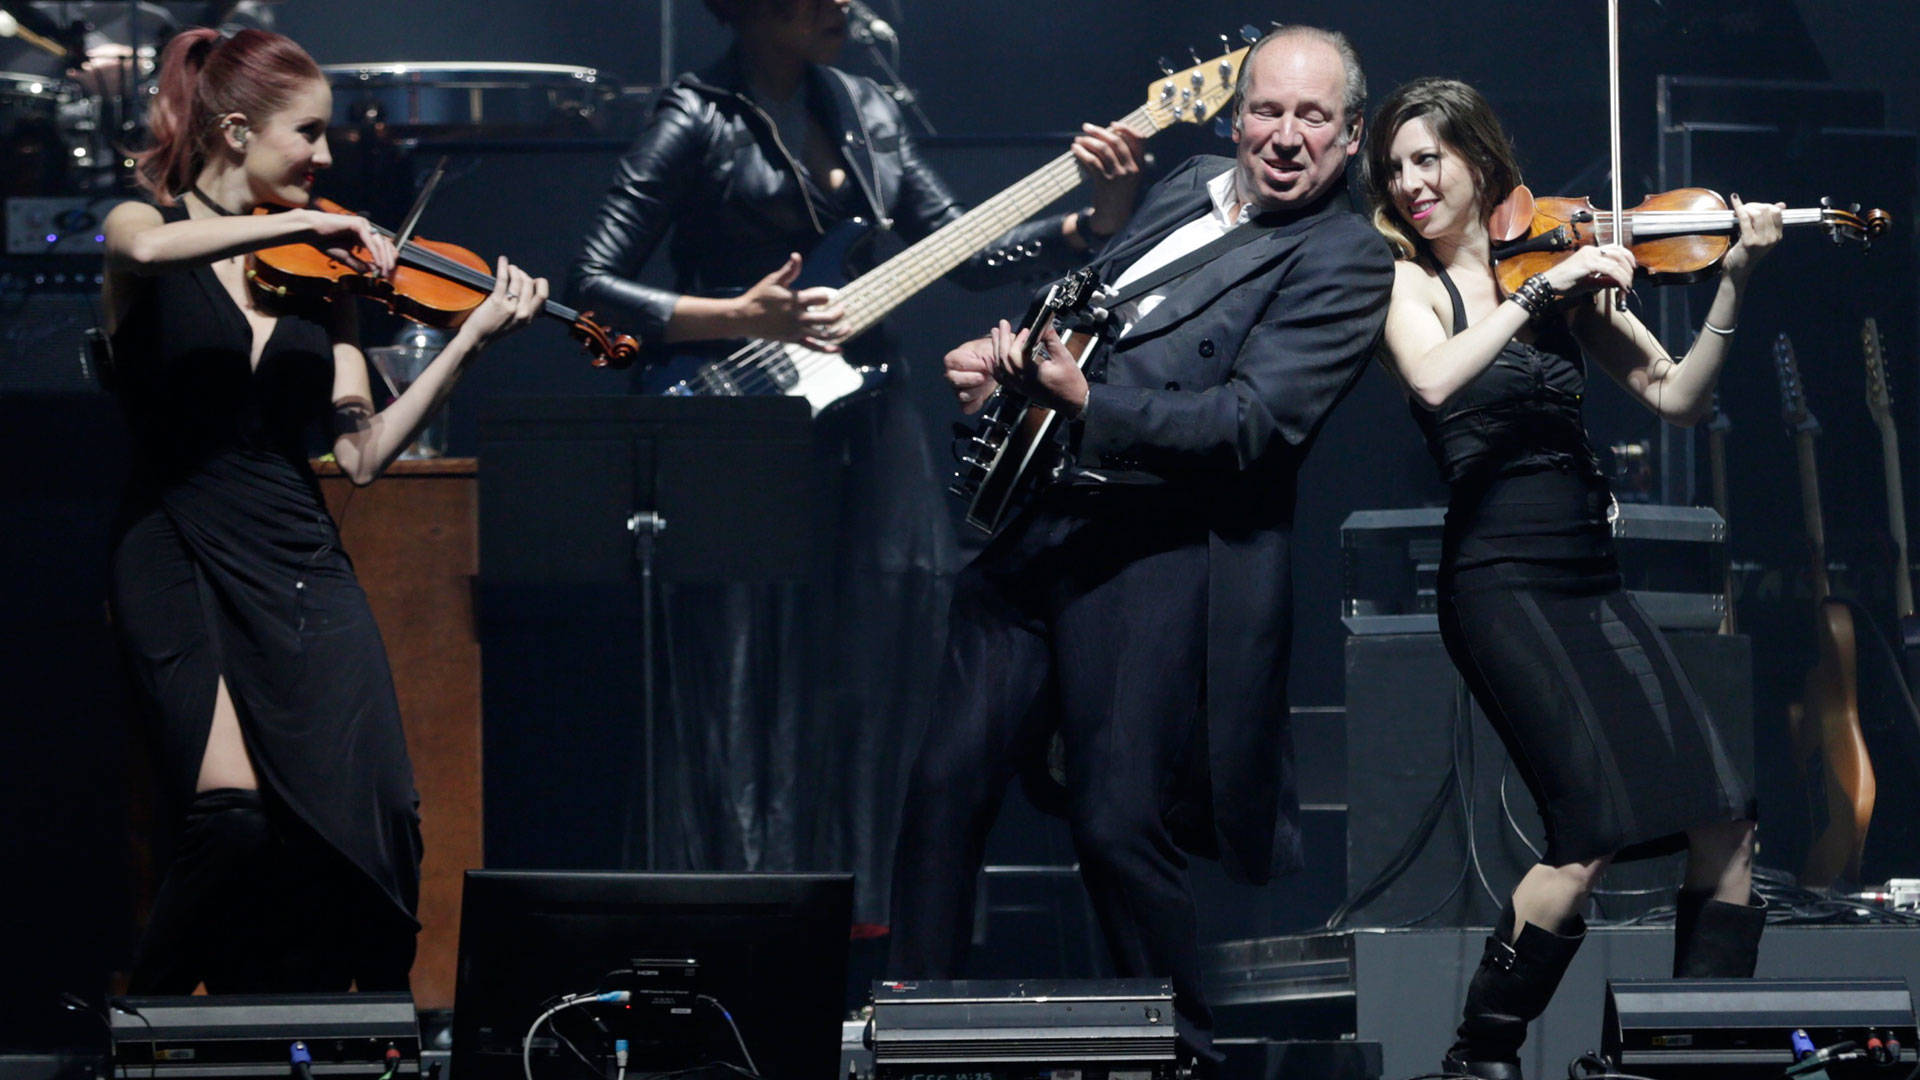 Hans Zimmer, on banjo, performs with members of his band at the Bill Graham Civic Auditorium in San Francisco on April 19, 2017. Photo: Gabe Meline/KQED